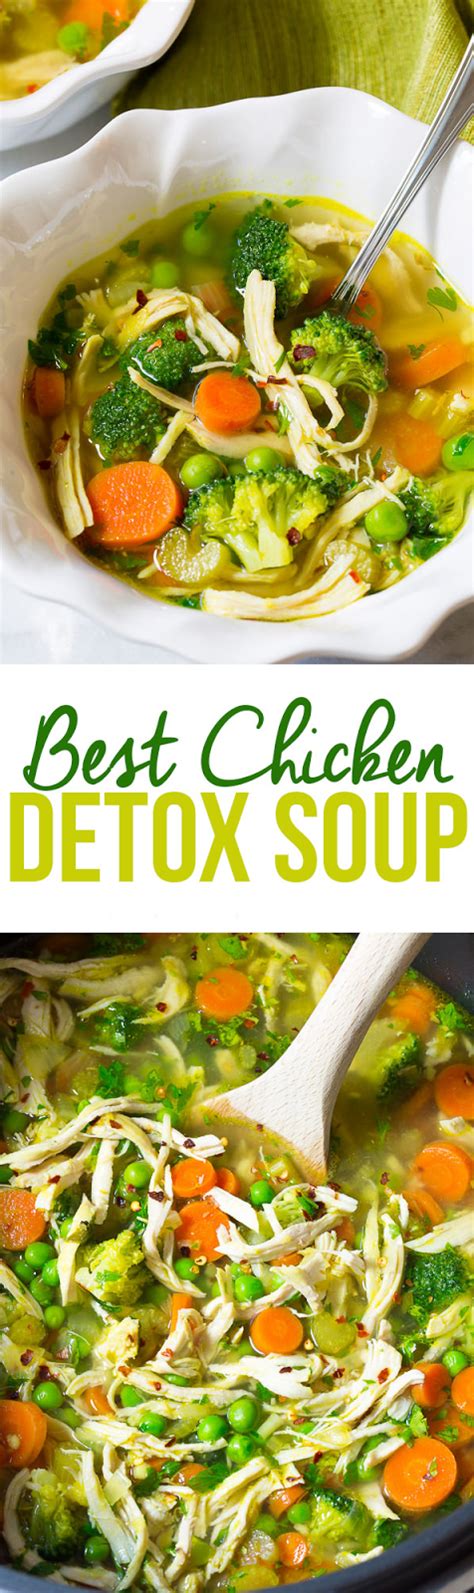 1/4 cup fresh parsley, minced. Chicken Detox Soup | Water Detox